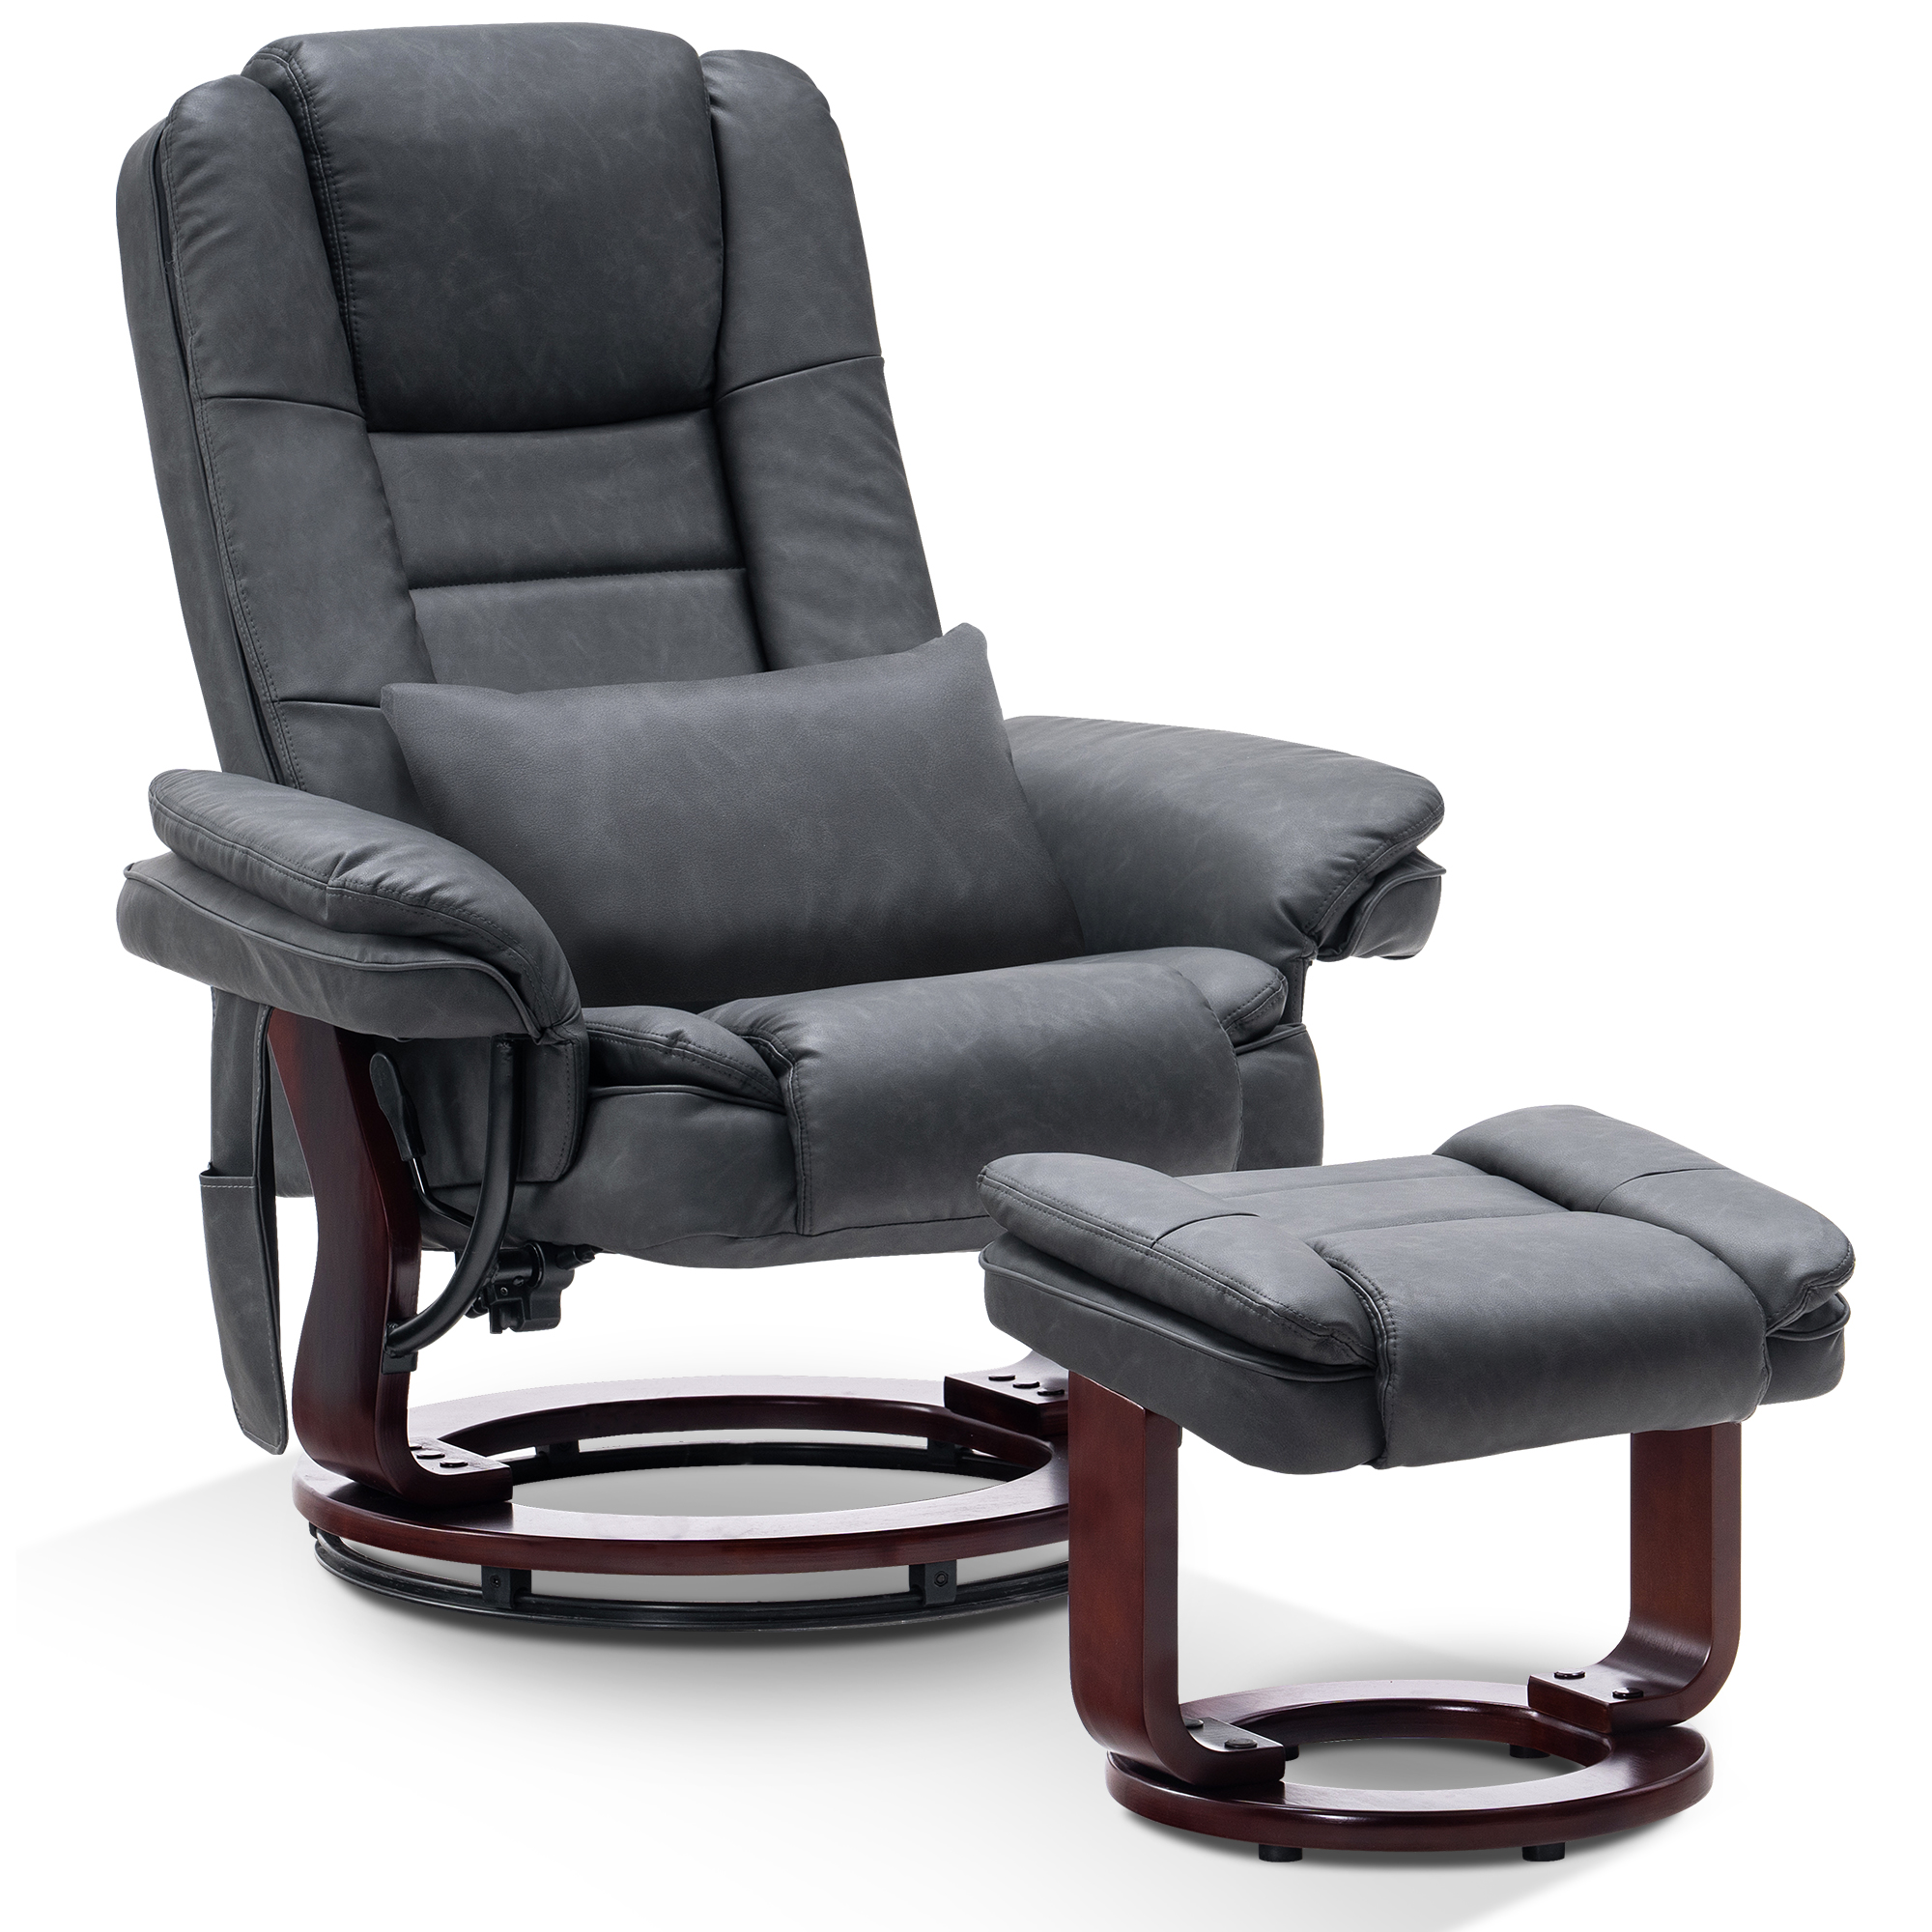 Mcombo Recliner with Ottoman Chair with Vibration Massage, Lumbar Pillow, Swivel 9096